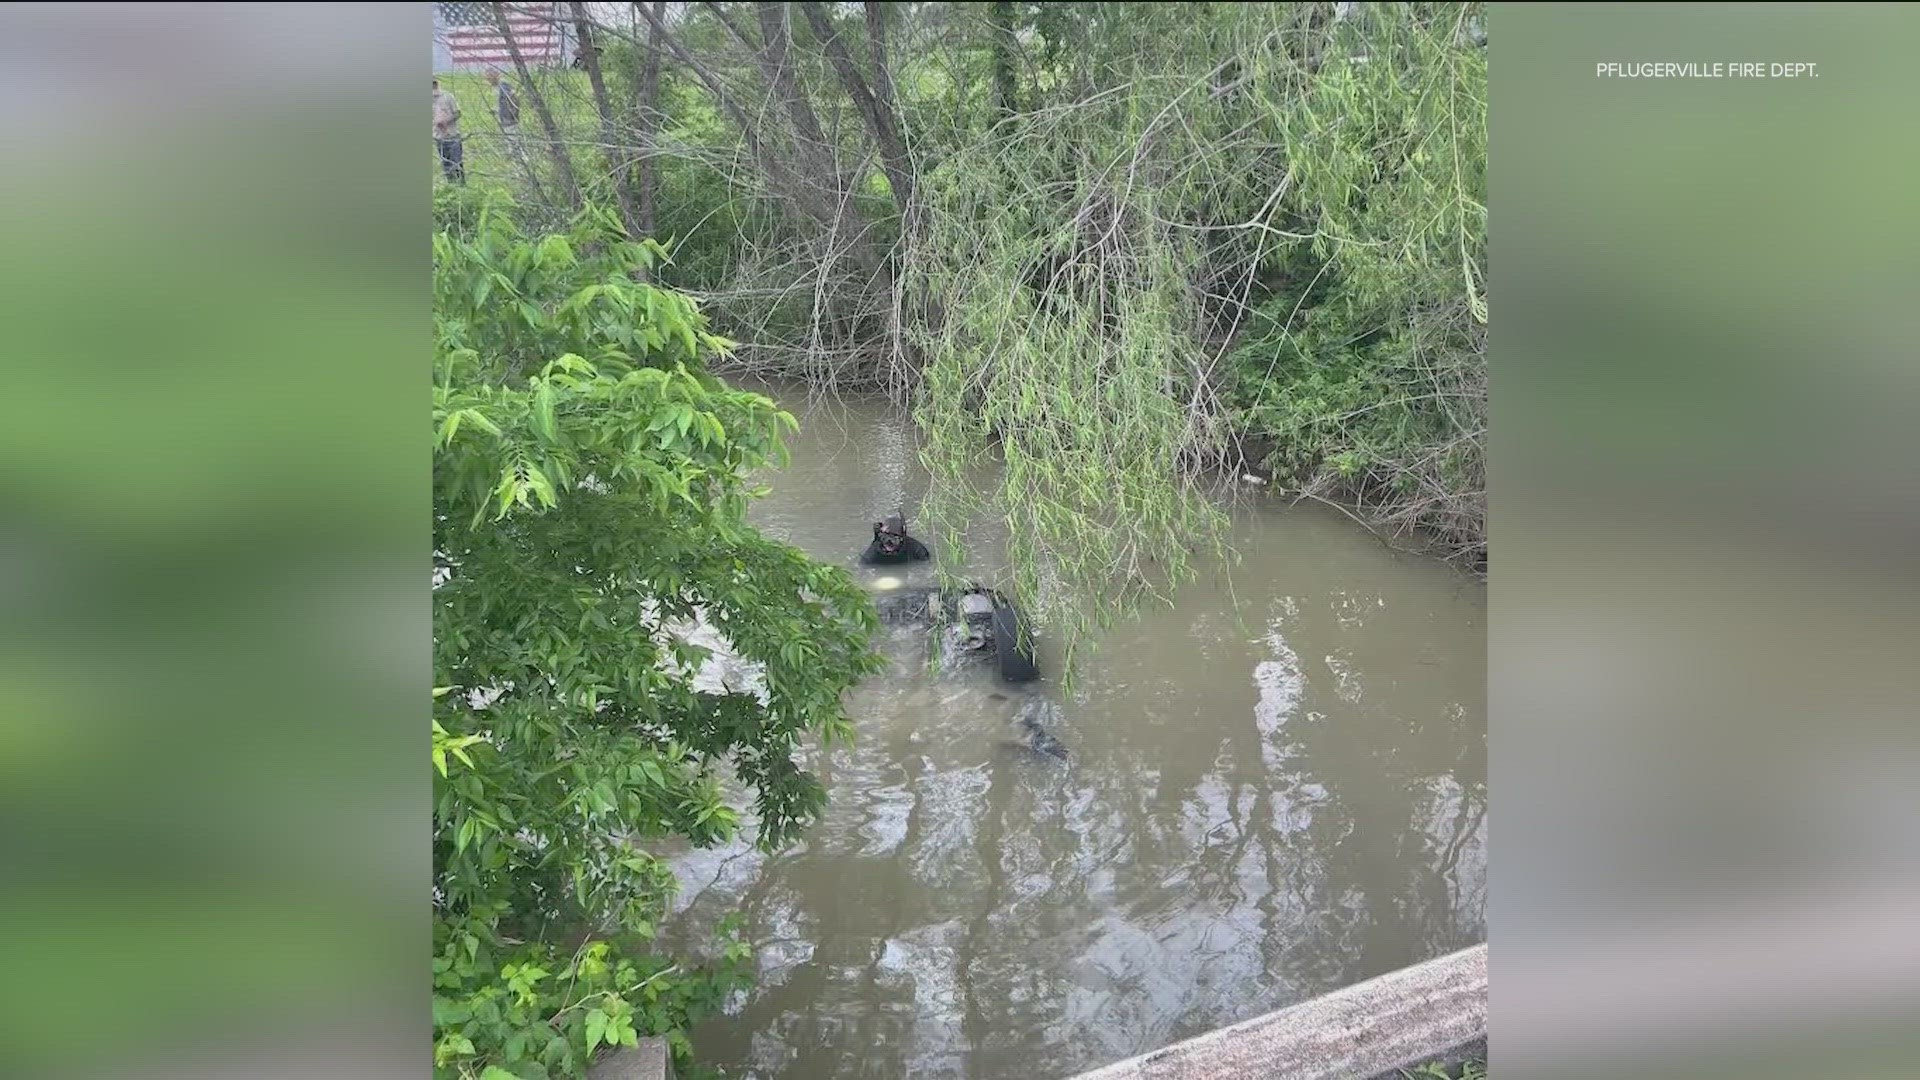 Firefighters responded to a vehicle in a creek Monday morning in East Travis County, between Manor and Pflugerville.